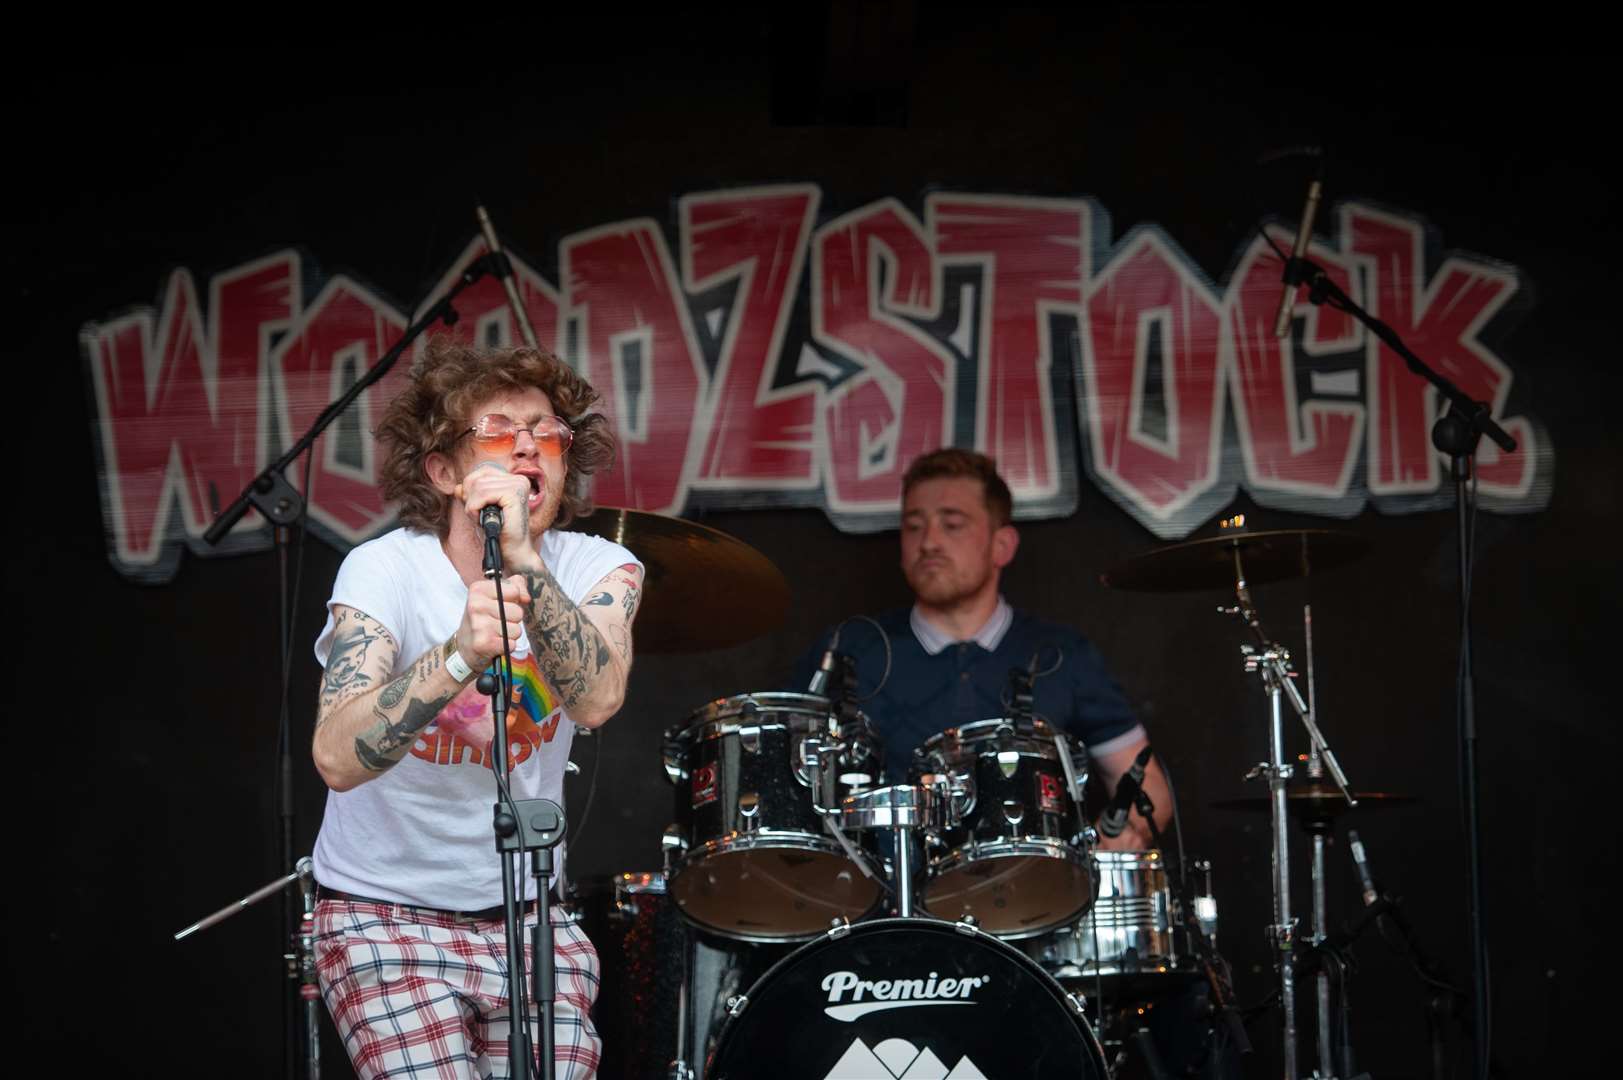 The Malts were among those entertaining music lovers at Woodzstock last year.